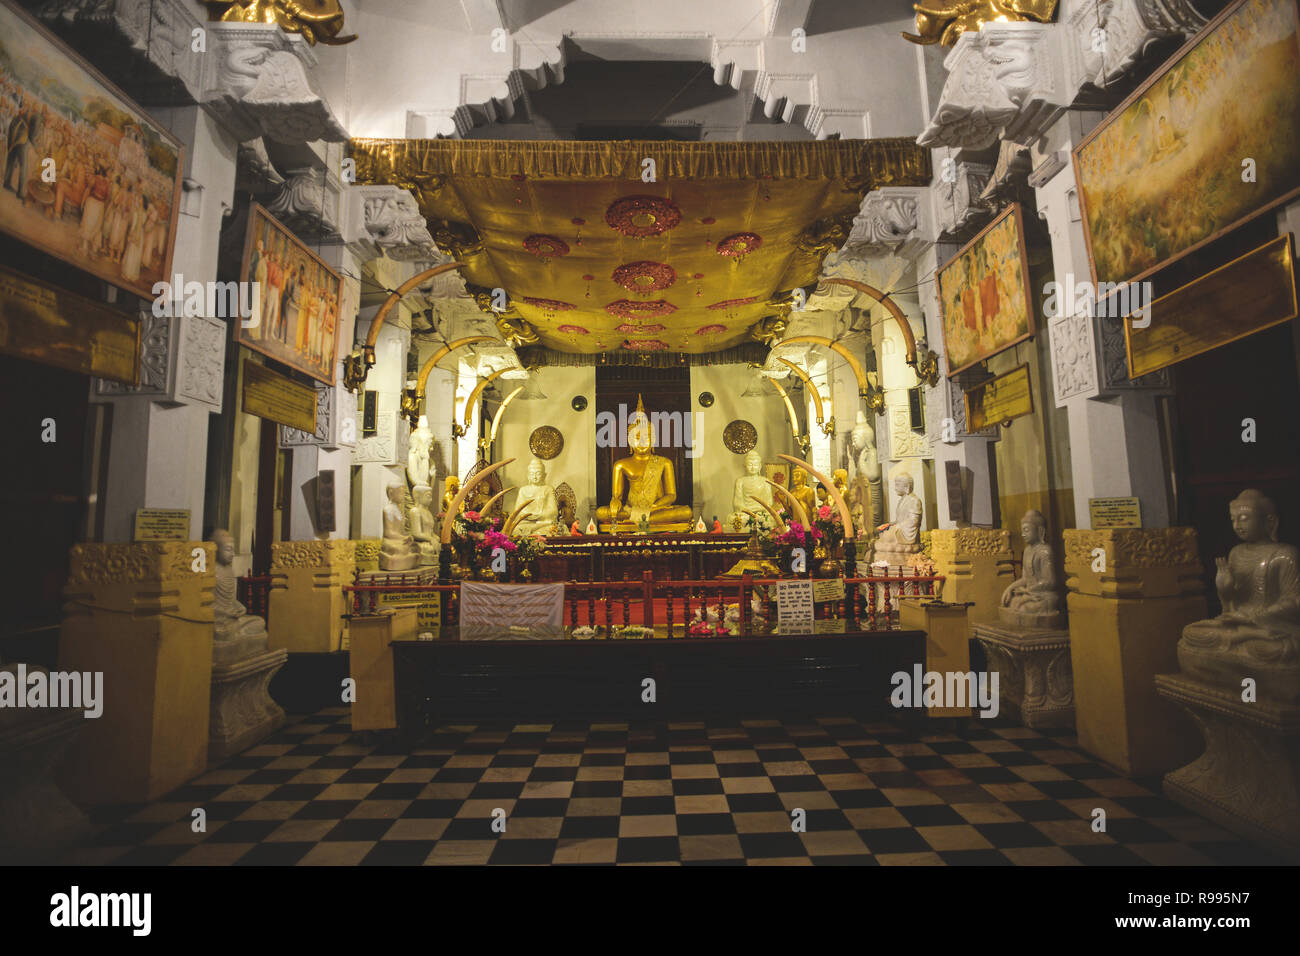 Golden Buddha statue inside the Temple of the Sacred Tooth Relic, Kandy, Sri Lanka, Stock Photo